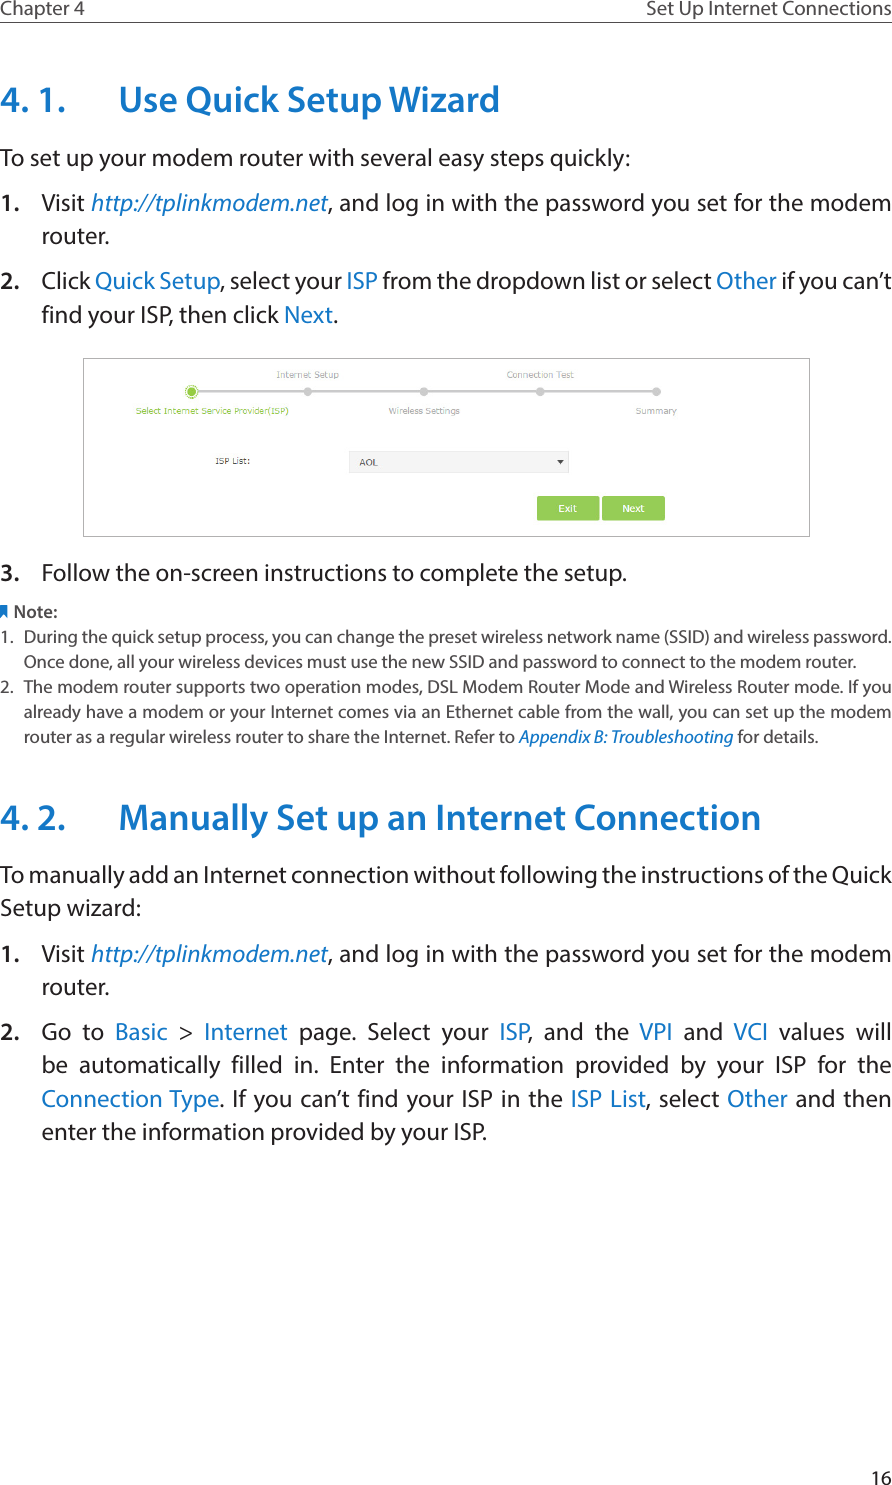 16Chapter 4 Set Up Internet Connections4. 1.  Use Quick Setup WizardTo set up your modem router with several easy steps quickly:1.  Visit http://tplinkmodem.net, and log in with the password you set for the modem router.2.  Click Quick Setup, select your ISP from the dropdown list or select Other if you can’t find your ISP, then click Next. 3.  Follow the on-screen instructions to complete the setup.Note:1.  During the quick setup process, you can change the preset wireless network name (SSID) and wireless password. Once done, all your wireless devices must use the new SSID and password to connect to the modem router.2.  The modem router supports two operation modes, DSL Modem Router Mode and Wireless Router mode. If you already have a modem or your Internet comes via an Ethernet cable from the wall, you can set up the modem router as a regular wireless router to share the Internet. Refer to Appendix B: Troubleshooting for details.4. 2.  Manually Set up an Internet ConnectionTo manually add an Internet connection without following the instructions of the Quick Setup wizard:1.  Visit http://tplinkmodem.net, and log in with the password you set for the modem router.2.  Go to Basic &gt; Internet page. Select your ISP, and the VPI and VCI  values will be automatically filled in. Enter the information provided by your ISP for the Connection Type. If you can’t find your ISP in the ISP List, select Other and then enter the information provided by your ISP.